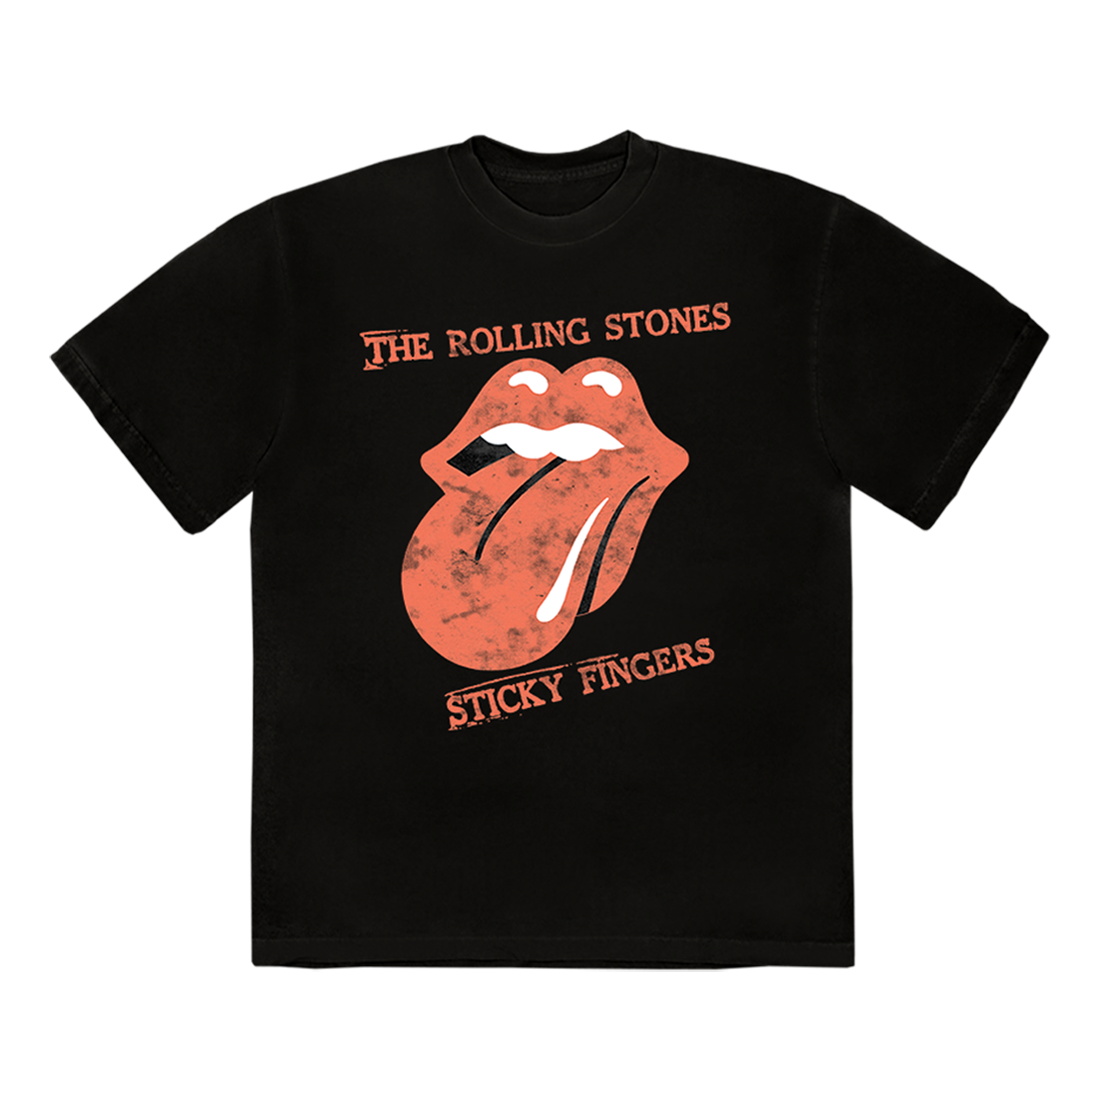 The Rolling Stones - Sticky Fingers 50 T-Shirt